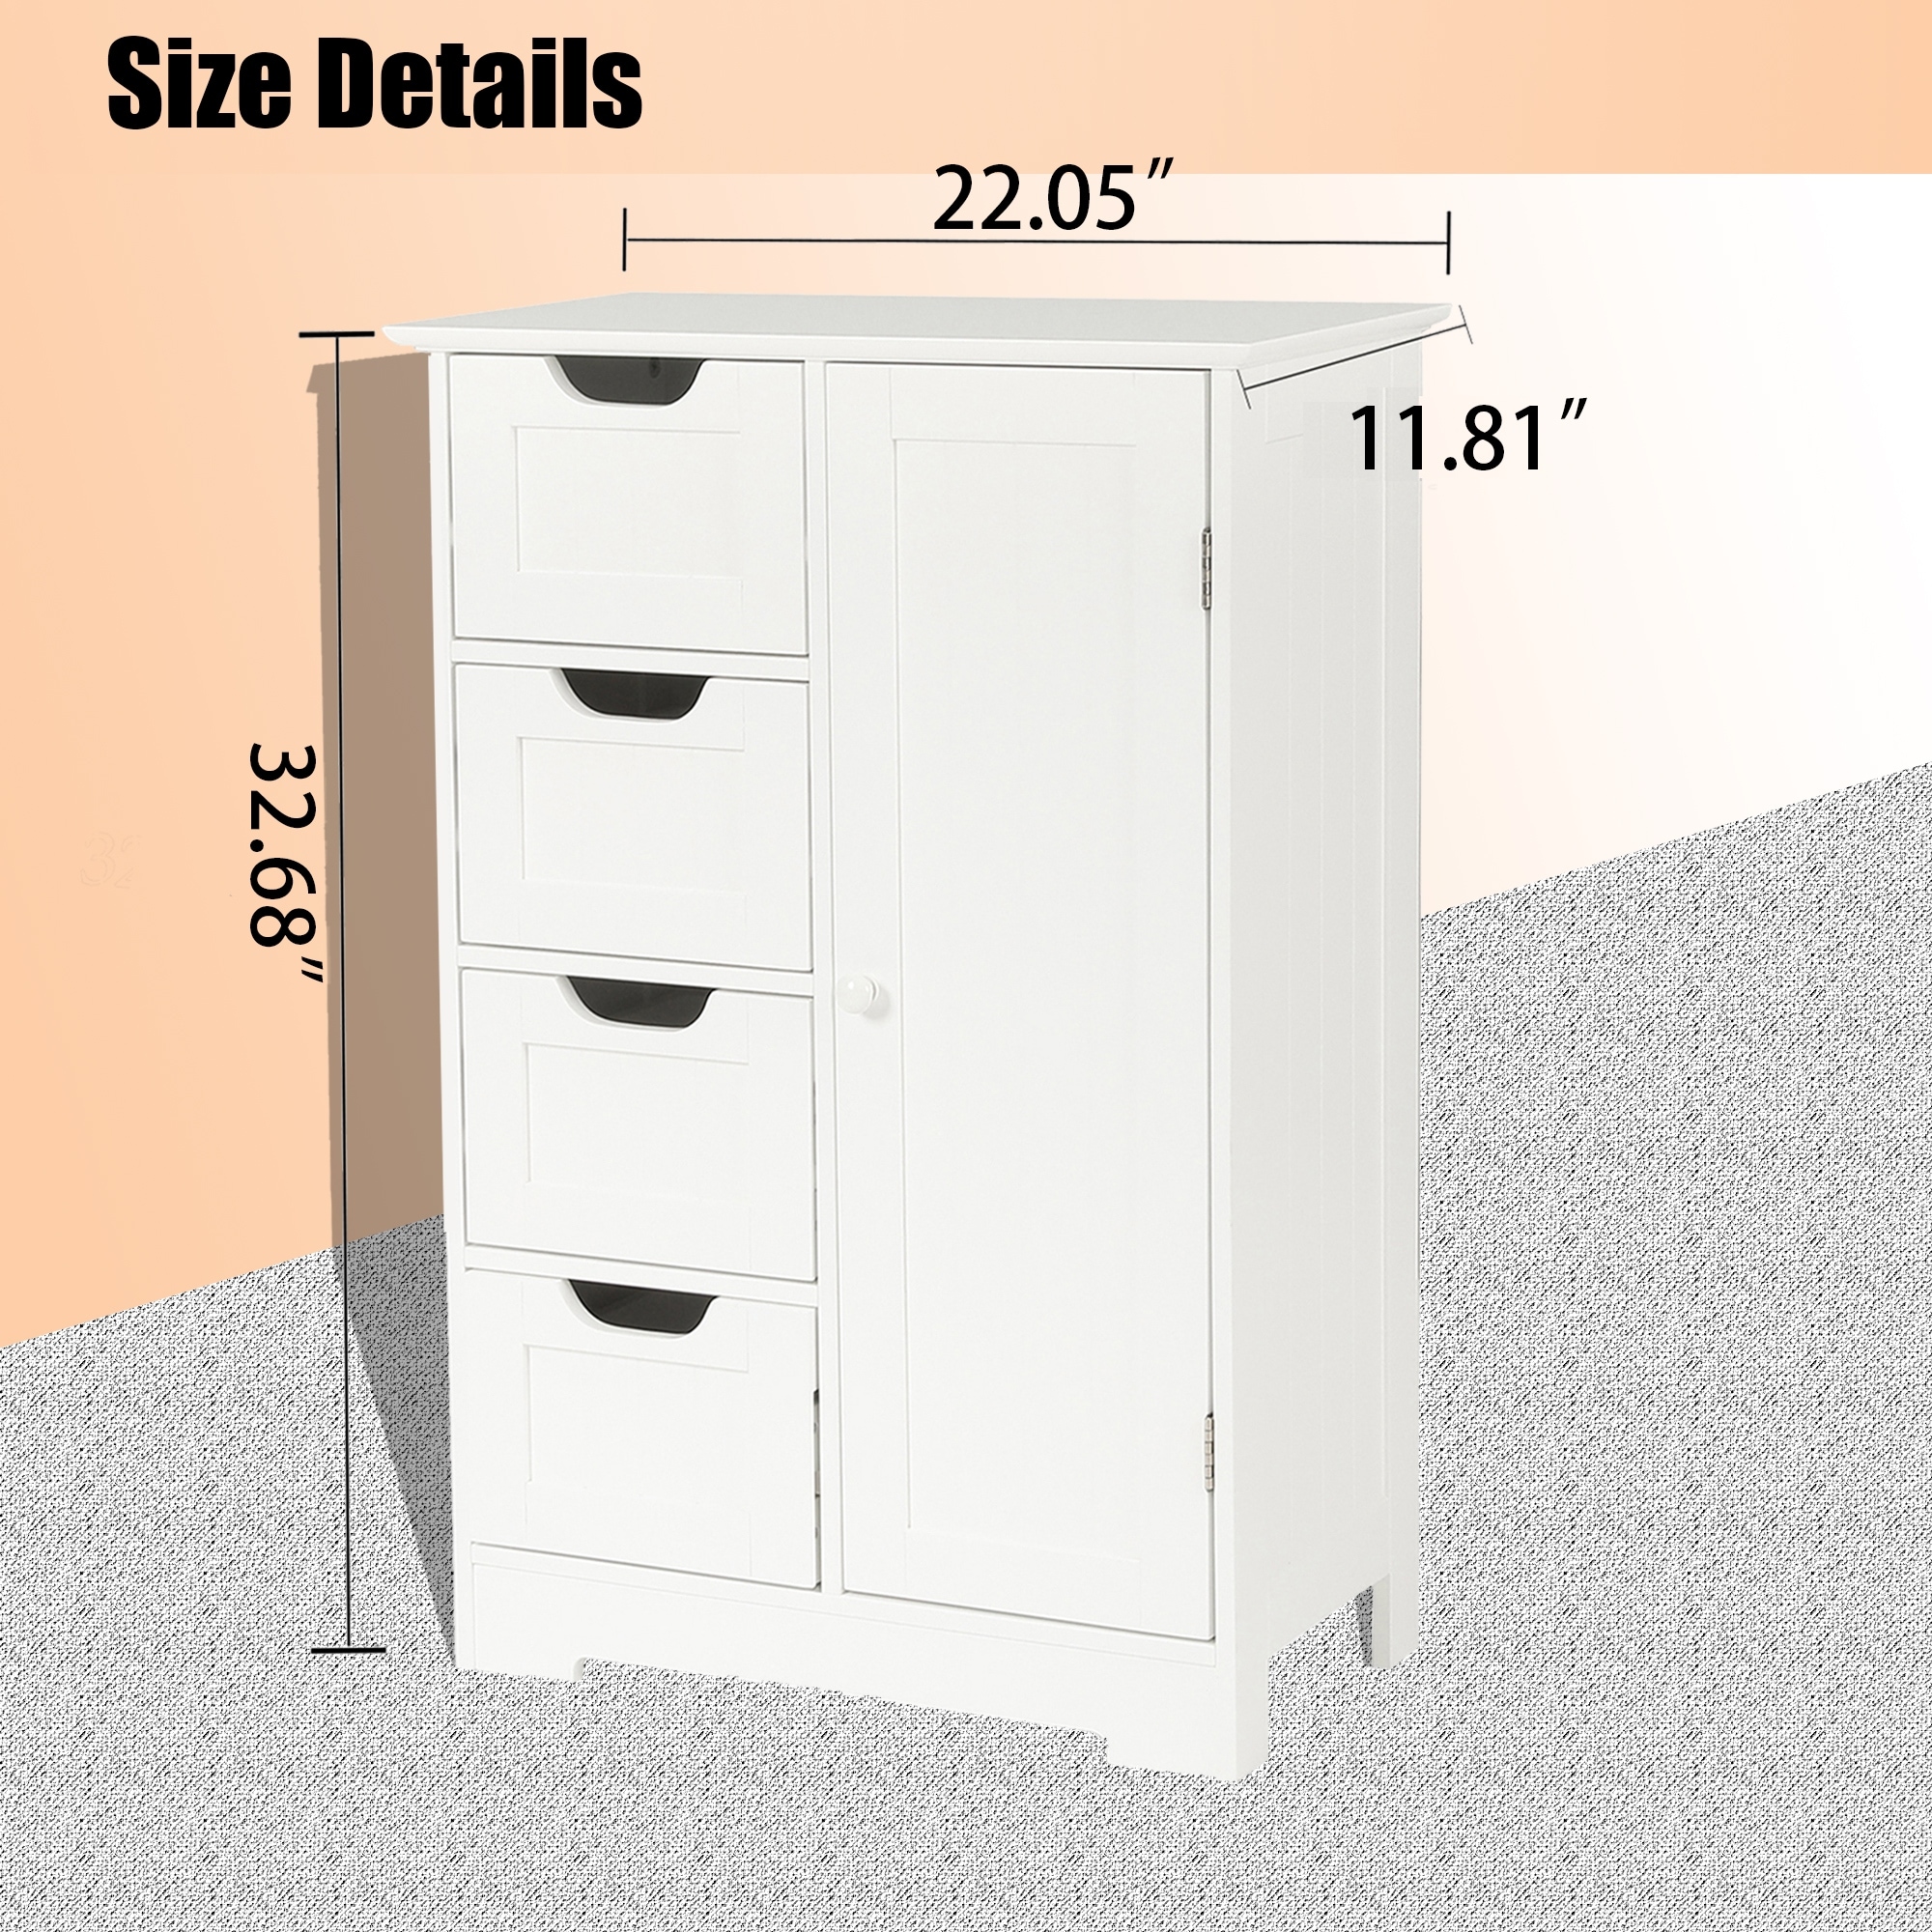 https://ak1.ostkcdn.com/images/products/is/images/direct/0274cb2cb5cc97e4c7149abcec0e9816af23ce98/White-Wood-4-Drawer-1-Door-Bathroom-Storage-Cabinet.jpg